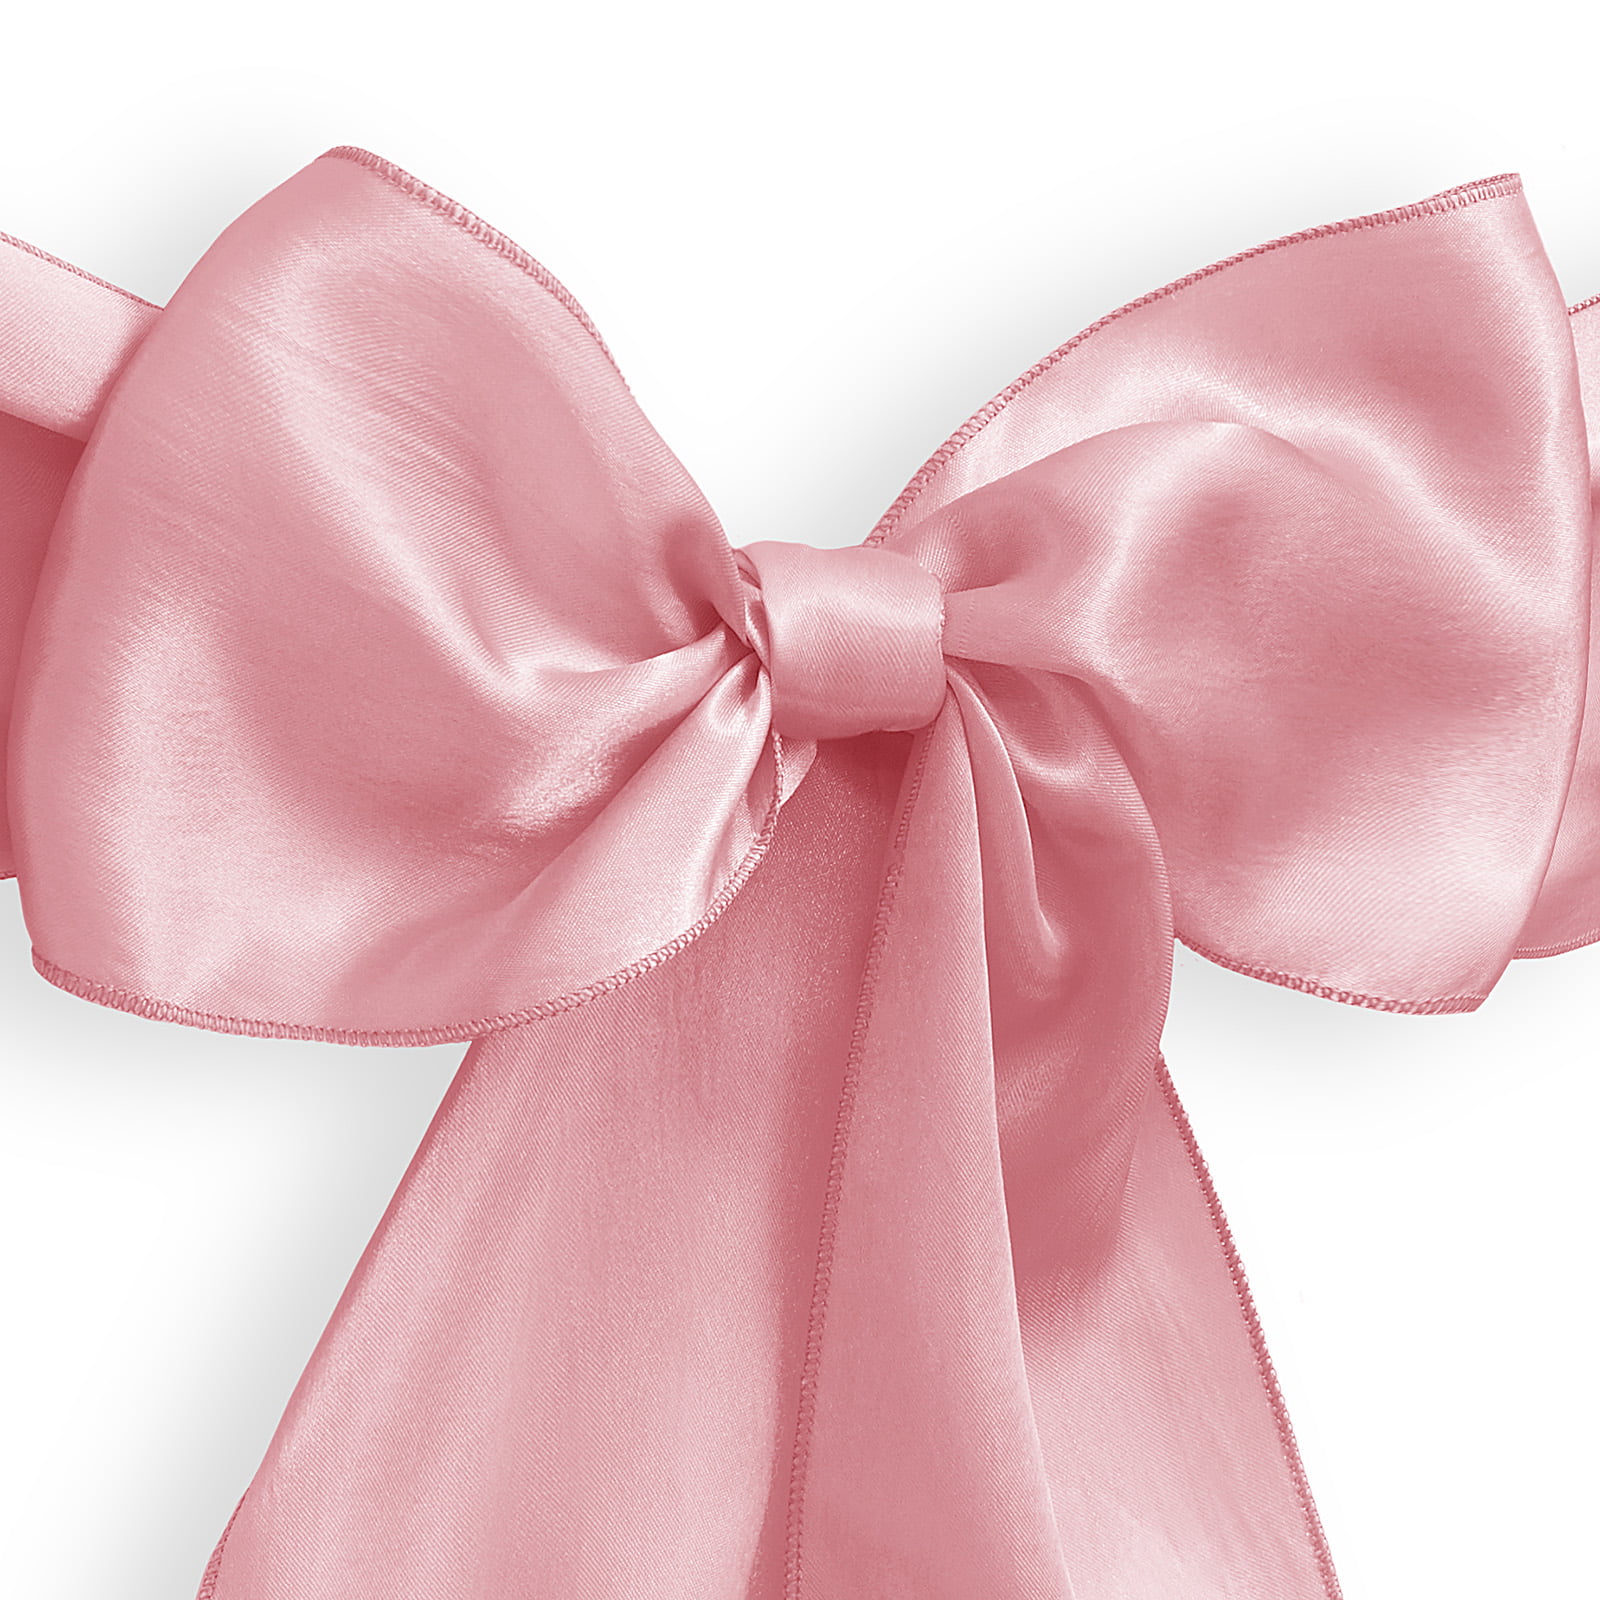 Ribbli Pink Satin Ribbon 4 Inch Wide Pink Ribbon for Wedding Chair Sash  Grand Opening Ceremony Big Bows Gift Wrapping Floral Crafts Cake  Decor-Double